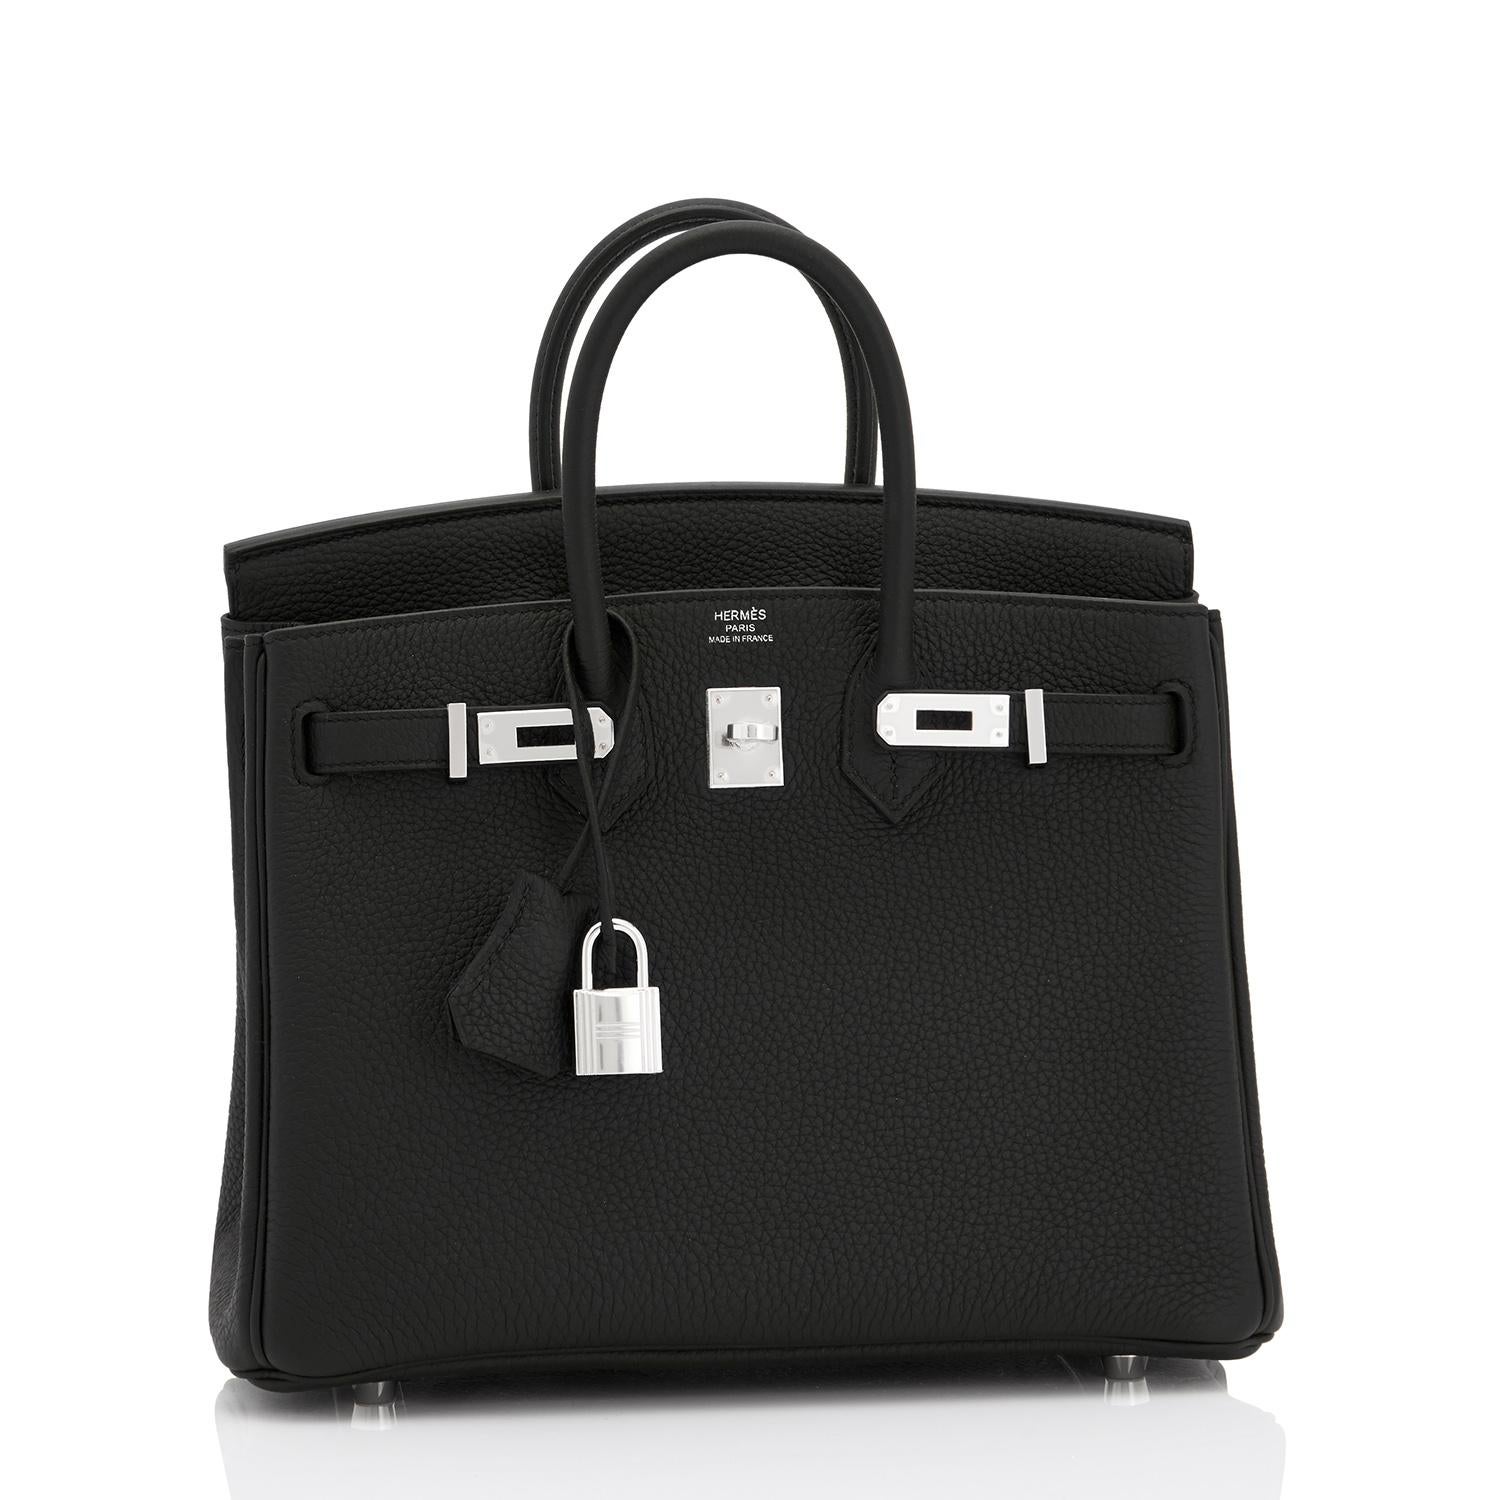 Hermes Birkin 25cm Black Togo Palladium Bag Z Stamp, 2021
Just purchased from Hermes store; bag bears new 2021 Z Stamp
Brand New in Box. Store Fresh. Pristine Condition (with plastic on hardware)
Perfect gift! Comes full set with keys, lock,